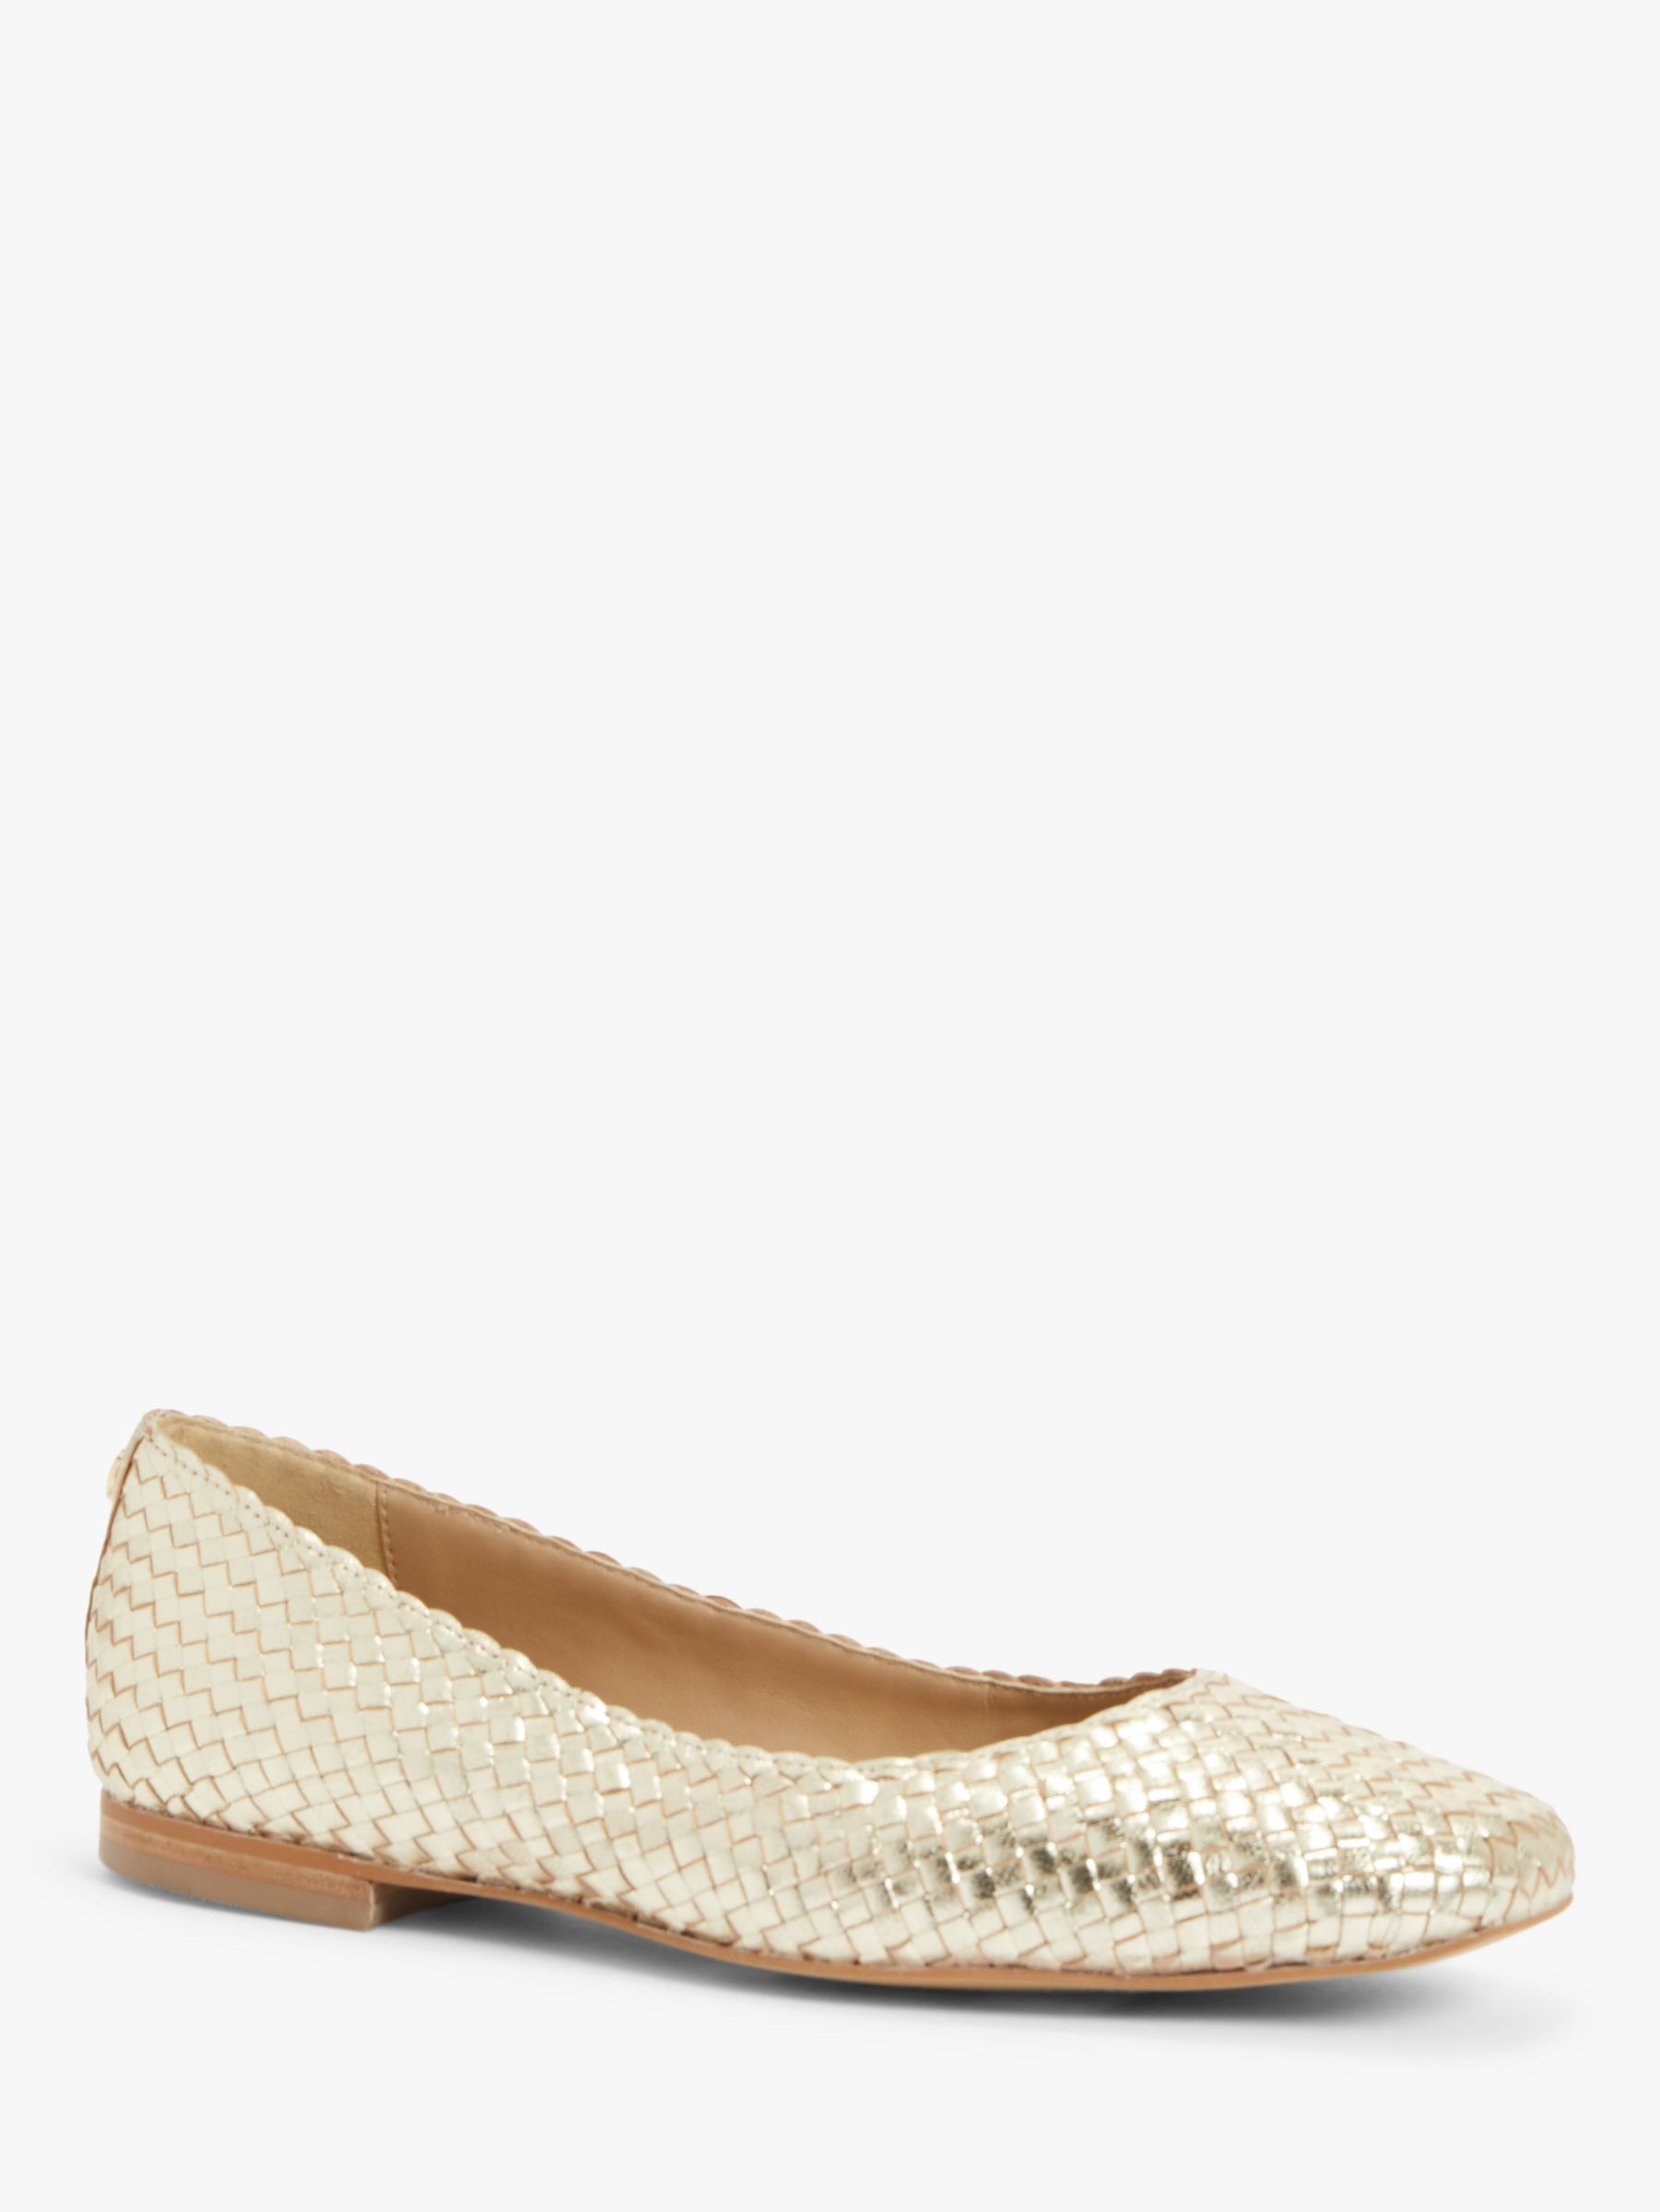 John Lewis Holly Leather Woven Ballerina Pumps, Gold, 3